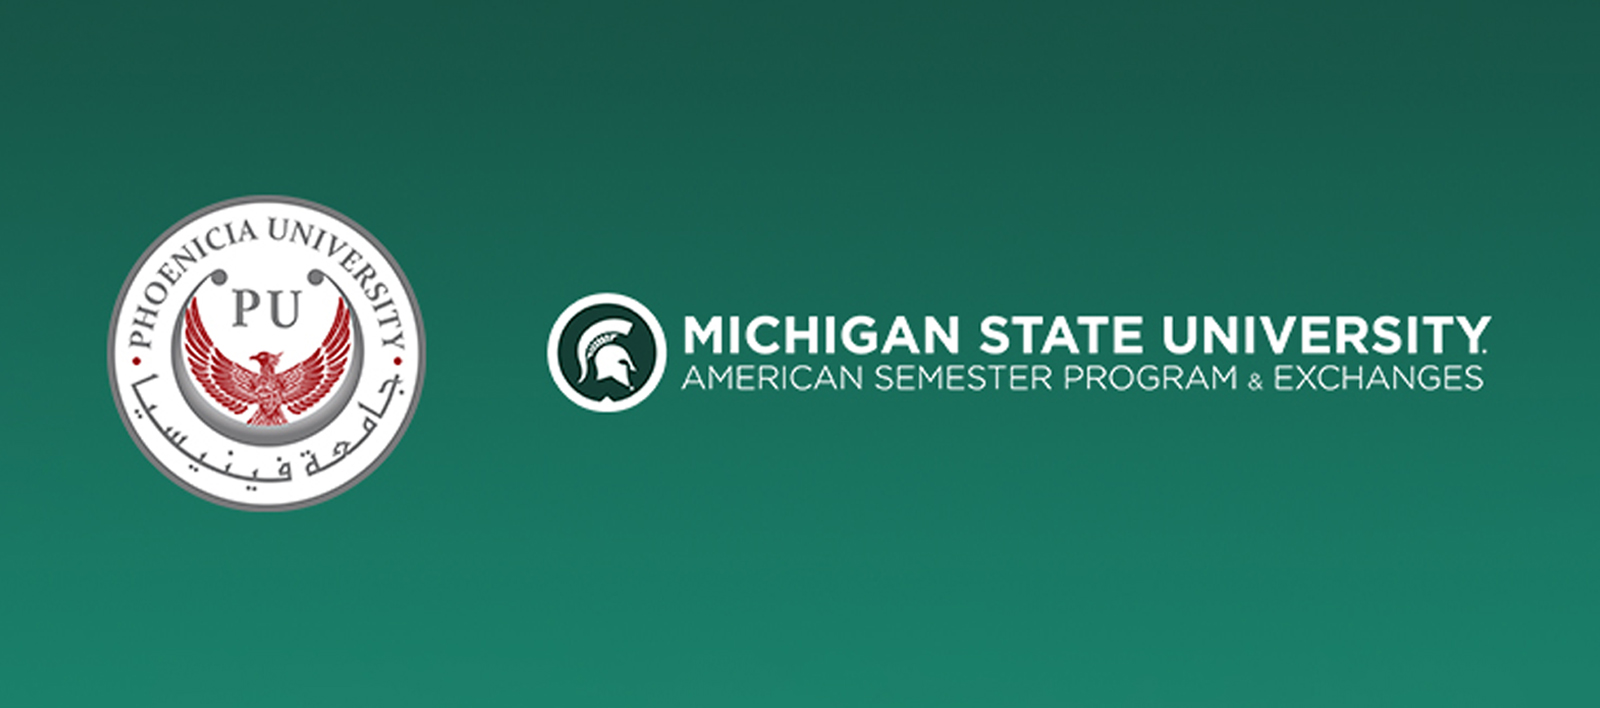 PU signs agreement with MSU